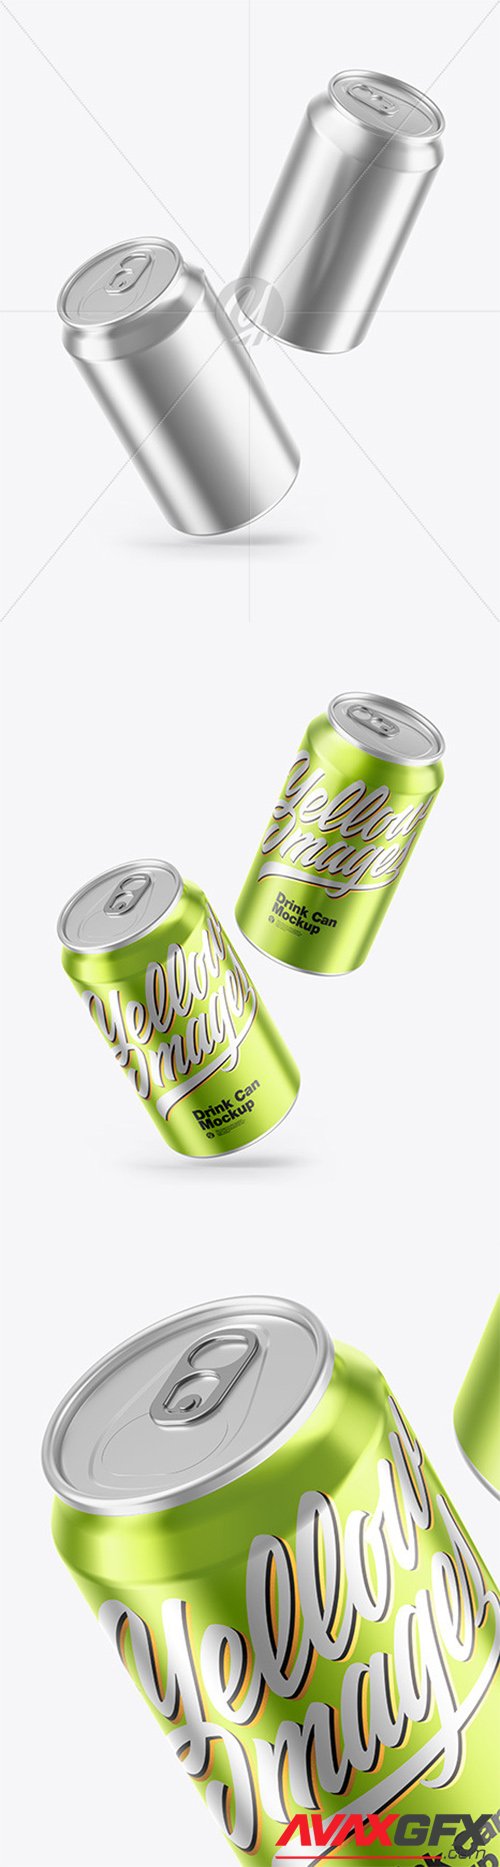 Download Two Metallic Drink Cans W Glossy Finish Mockup 68403 Avaxgfx All Downloads That You Need In One Place Graphic From Nitroflare Rapidgator PSD Mockup Templates